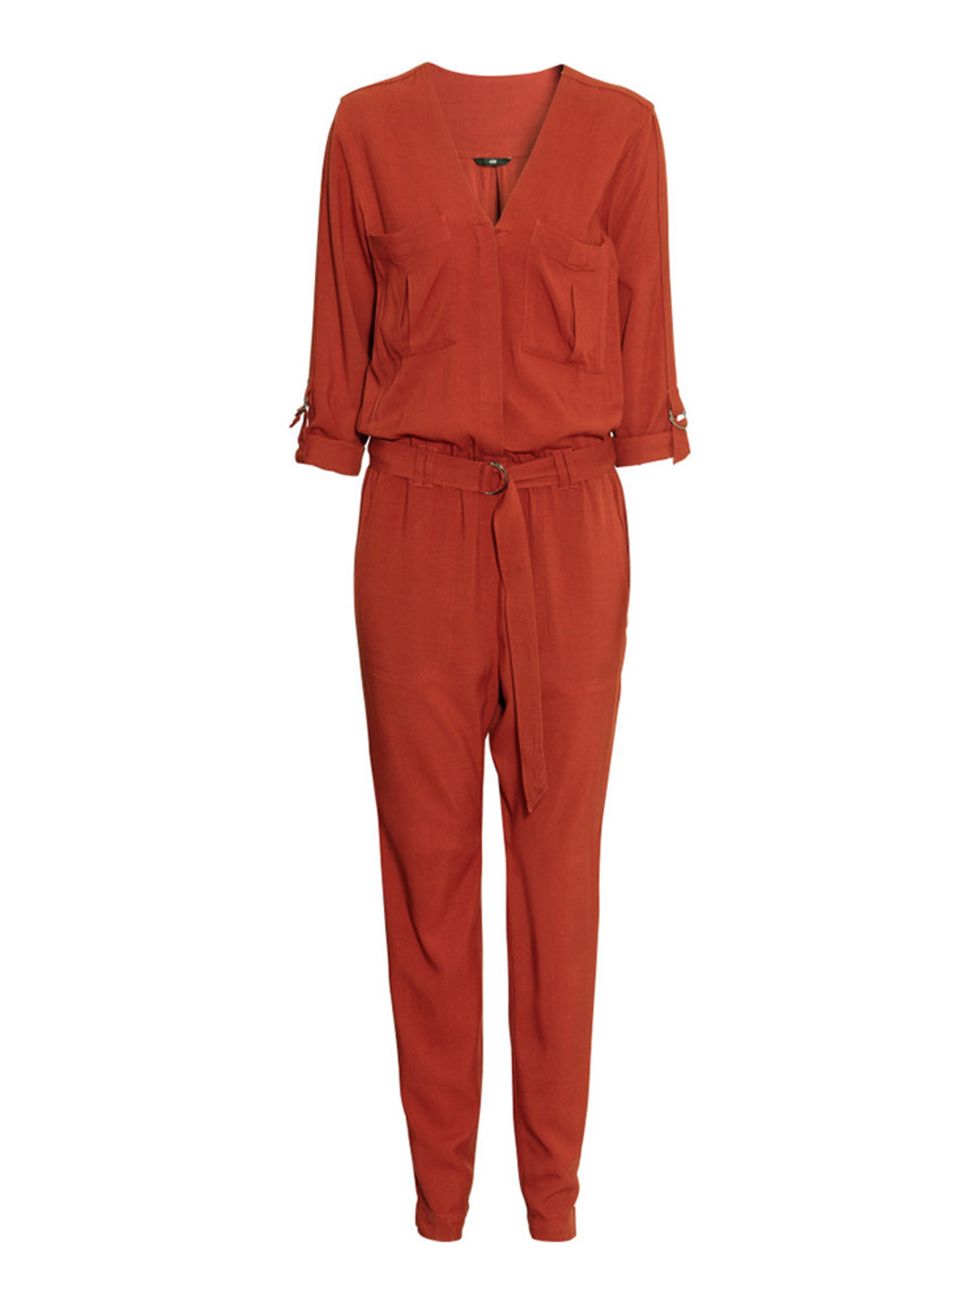 <p><a href="http://www.hm.com/gb/product/31927?article=31927-A" target="_blank">H&M Jumpsuit</a>, £29.99</p>